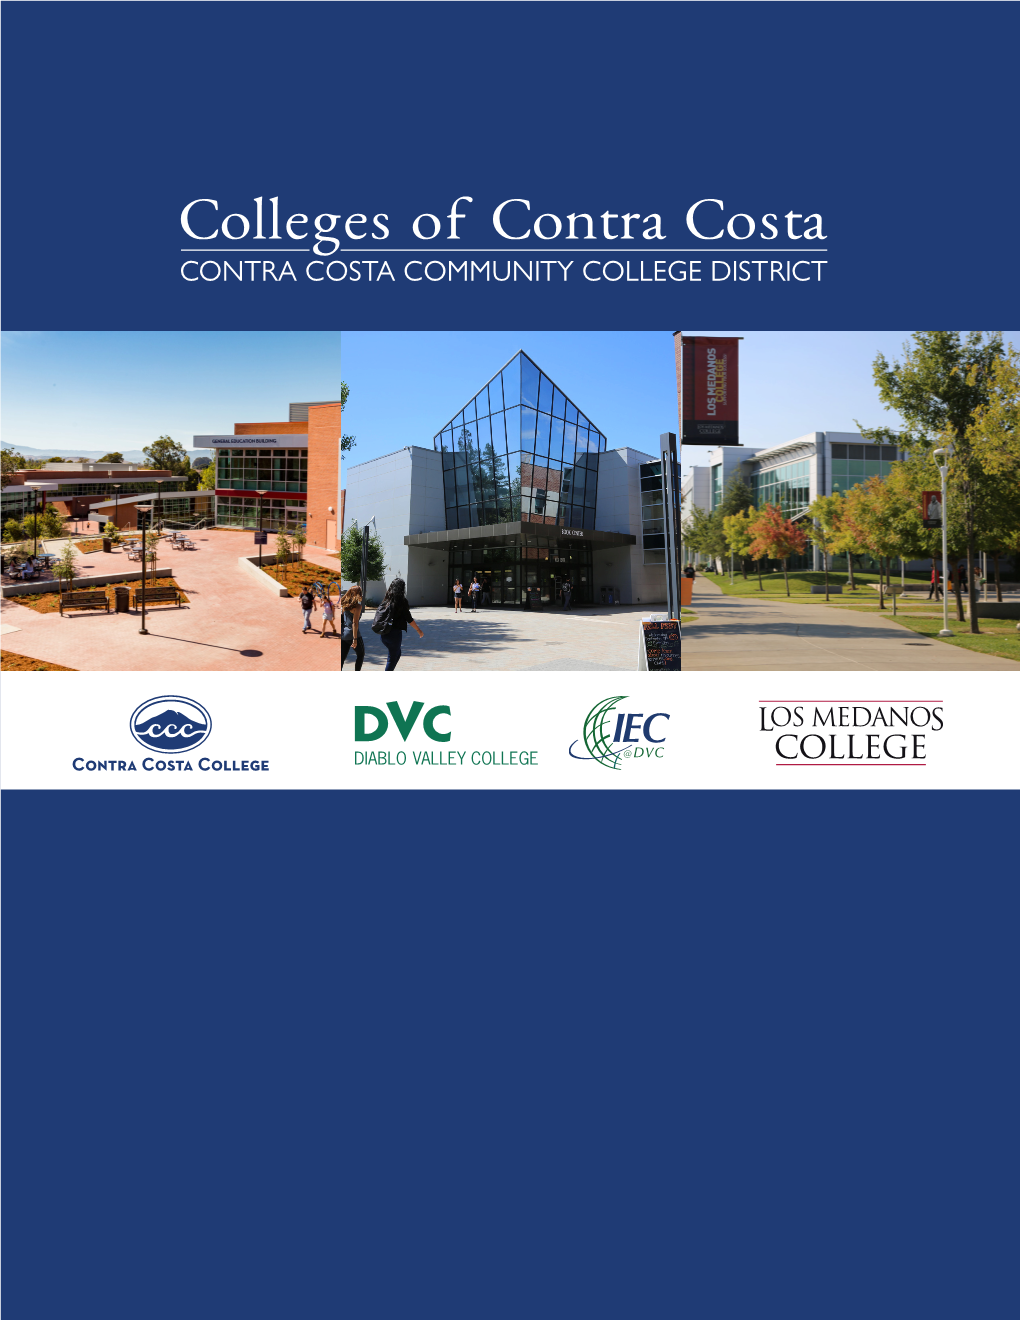 Colleges-Of-Contra-Costa-Brochure